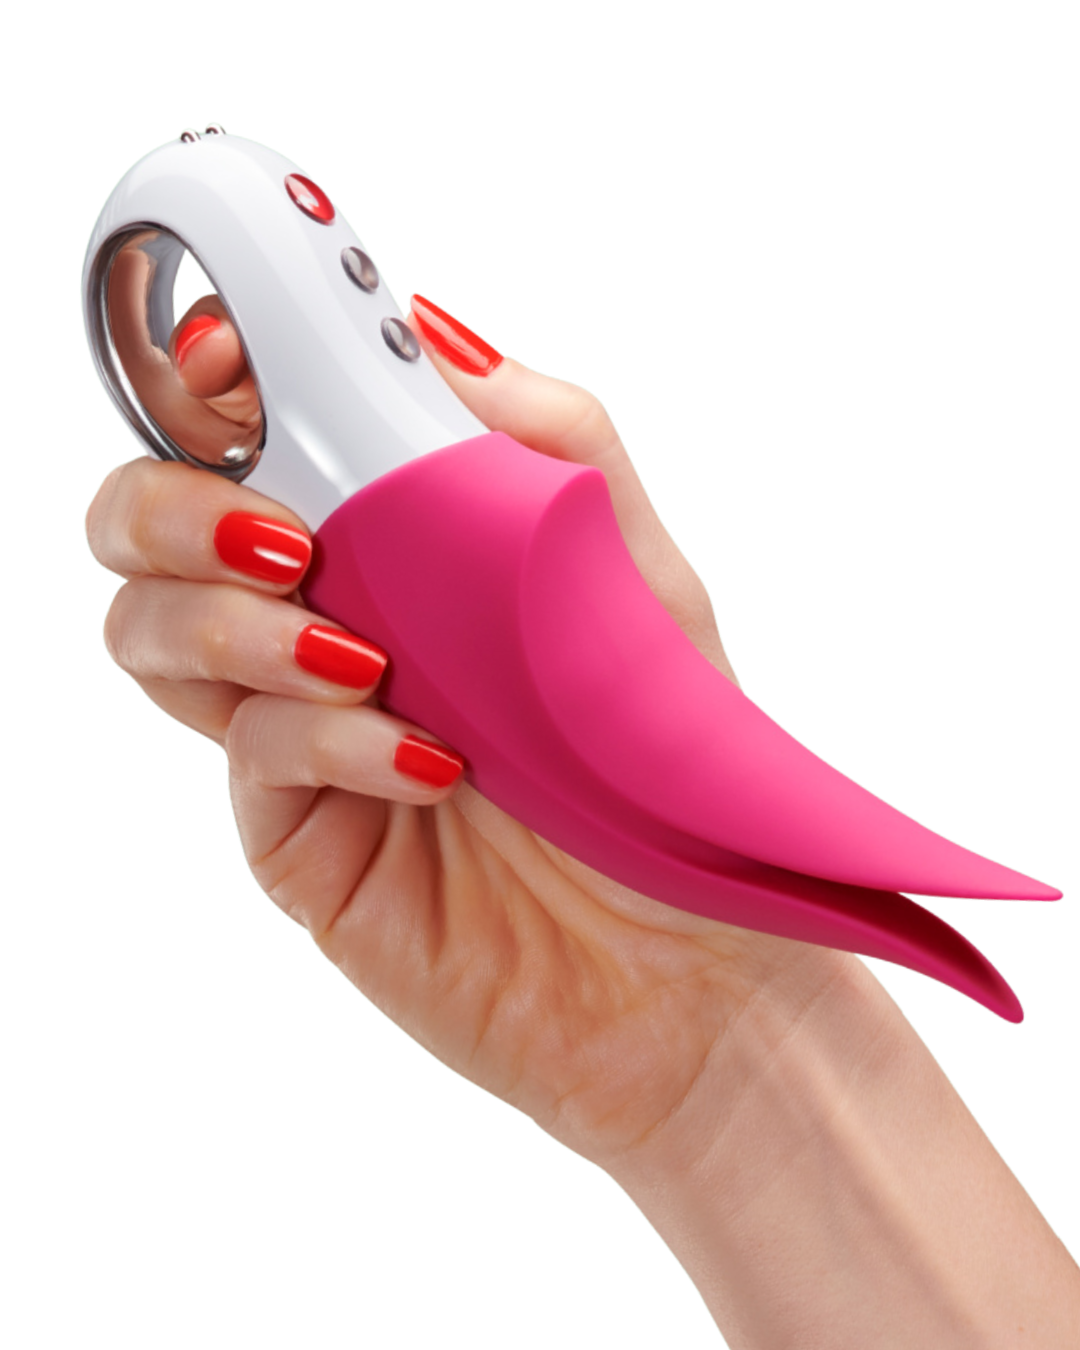 Fun Factory Volta External Vibrator - pink held in a woman's hand to show the size